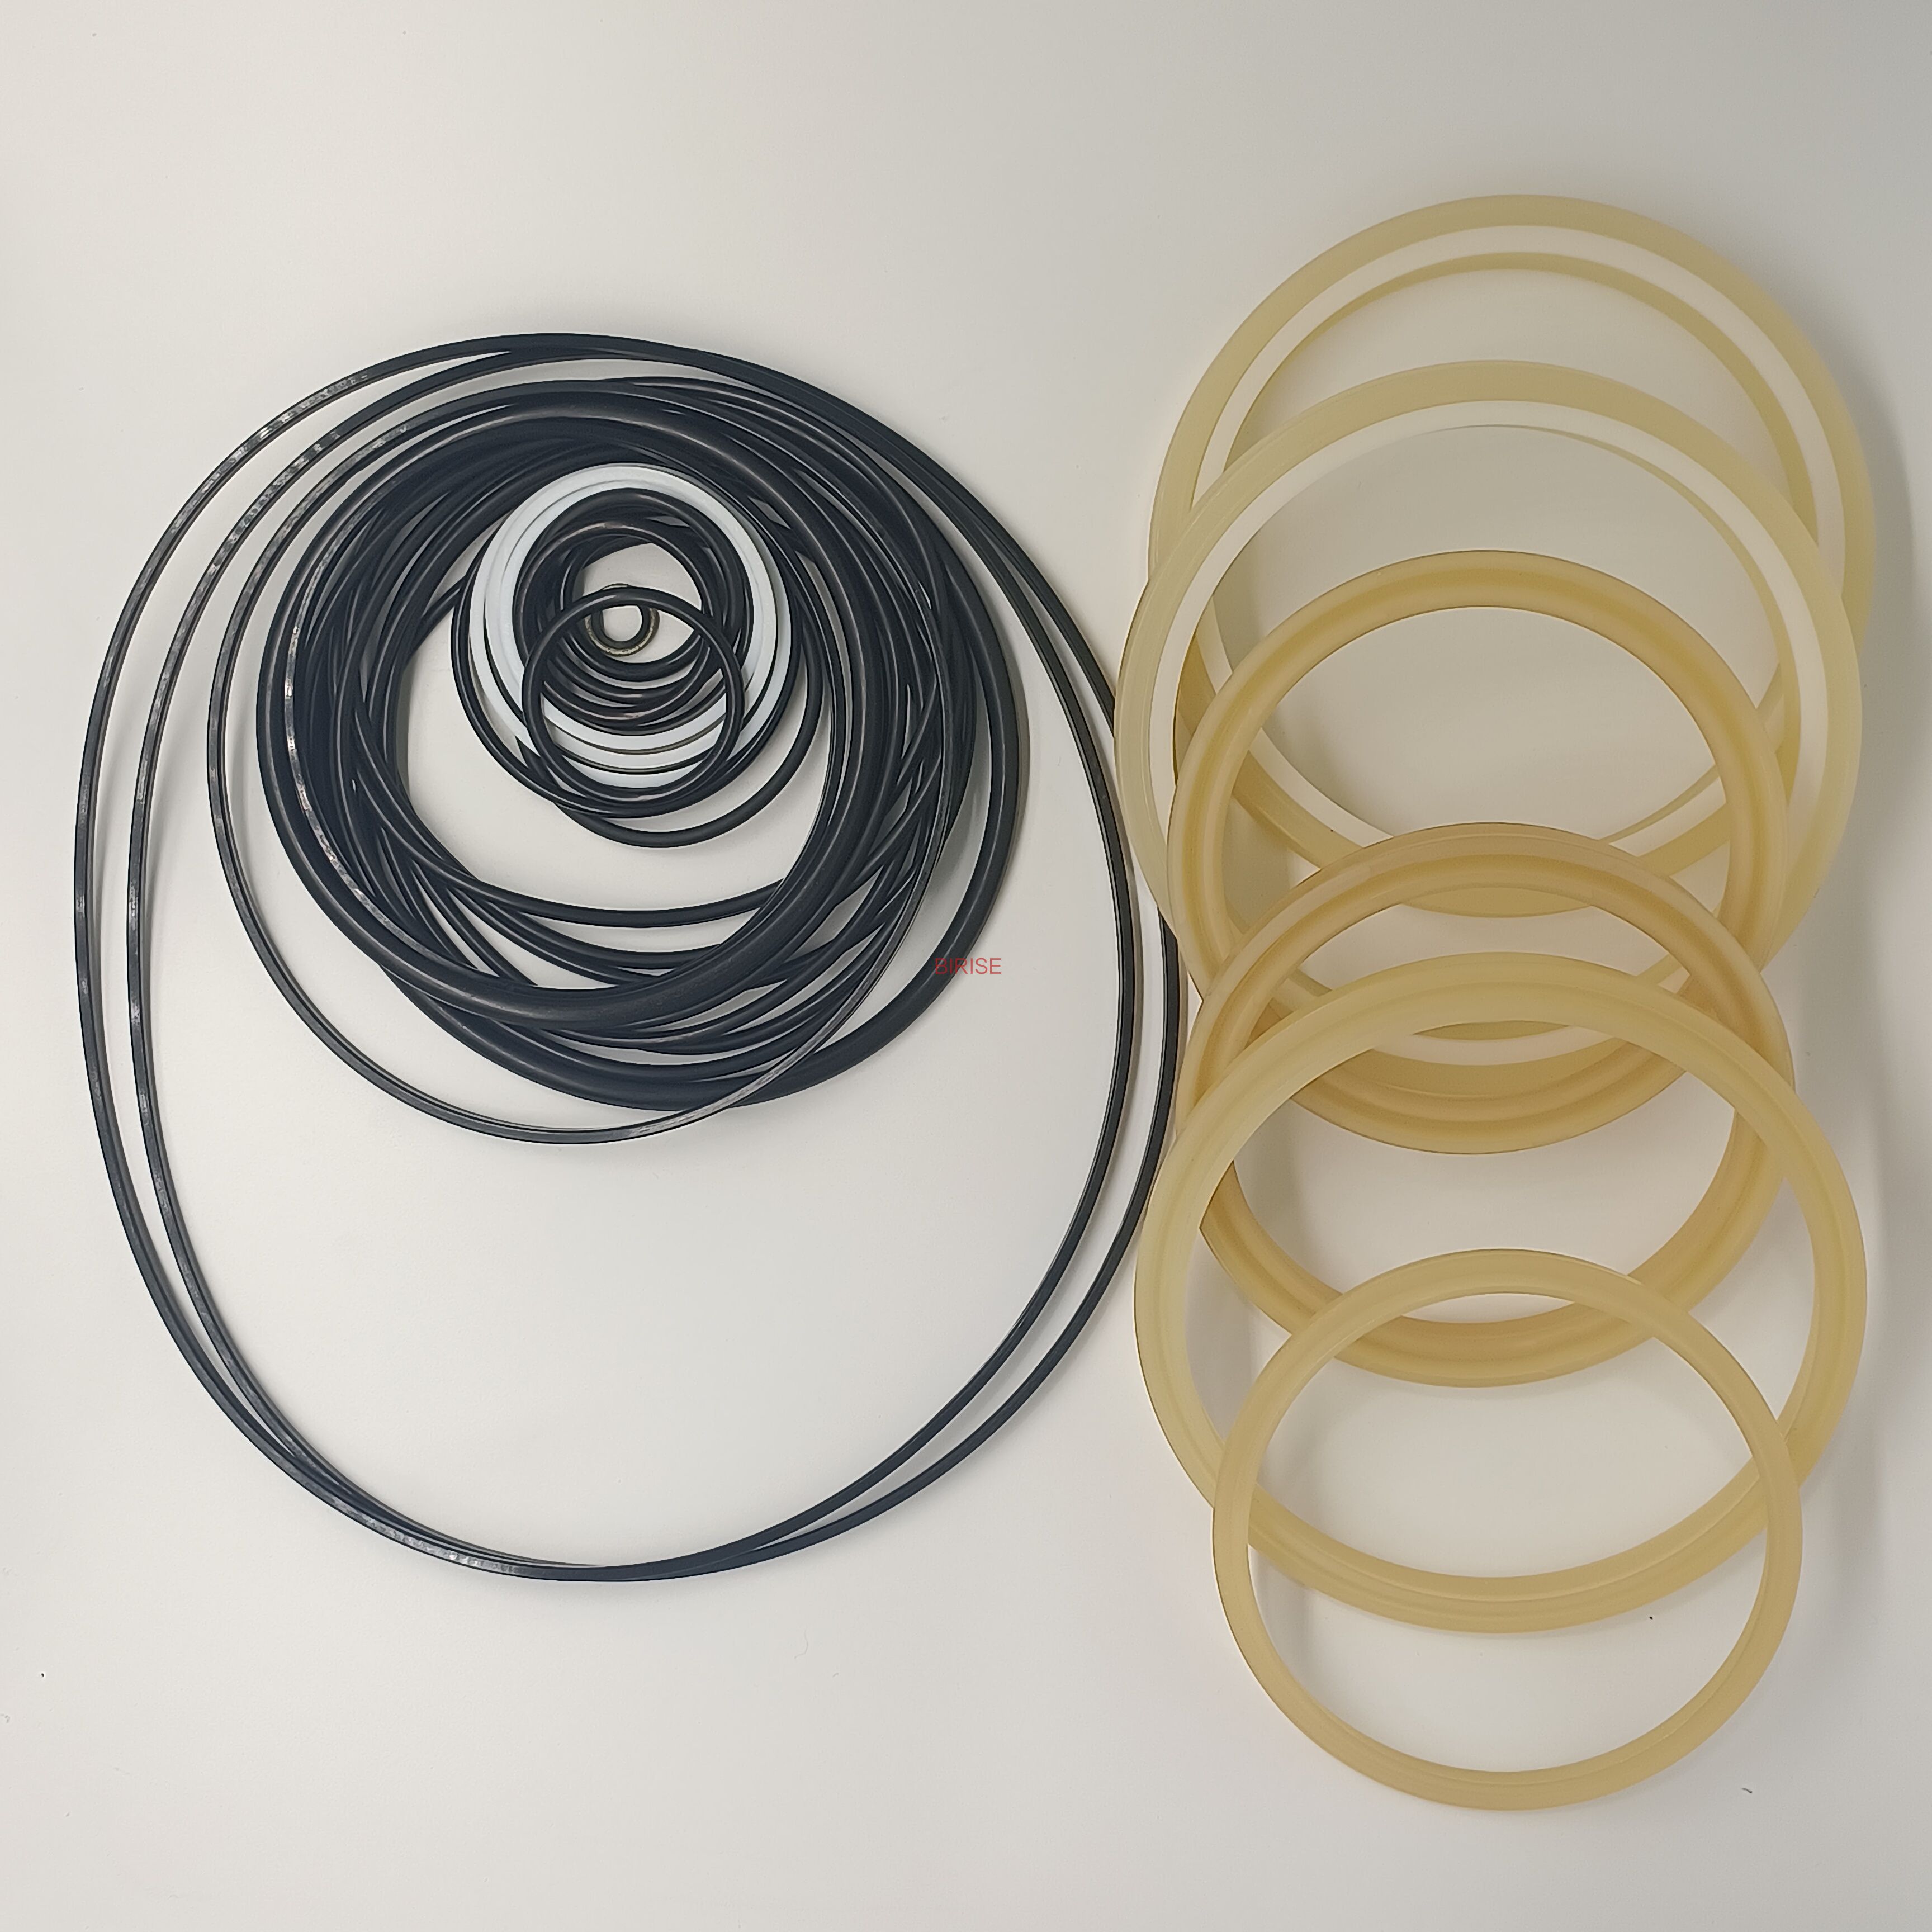 High-Quality Hydraulic Breaker Seal Kits for Efficient Equipment Maintenance